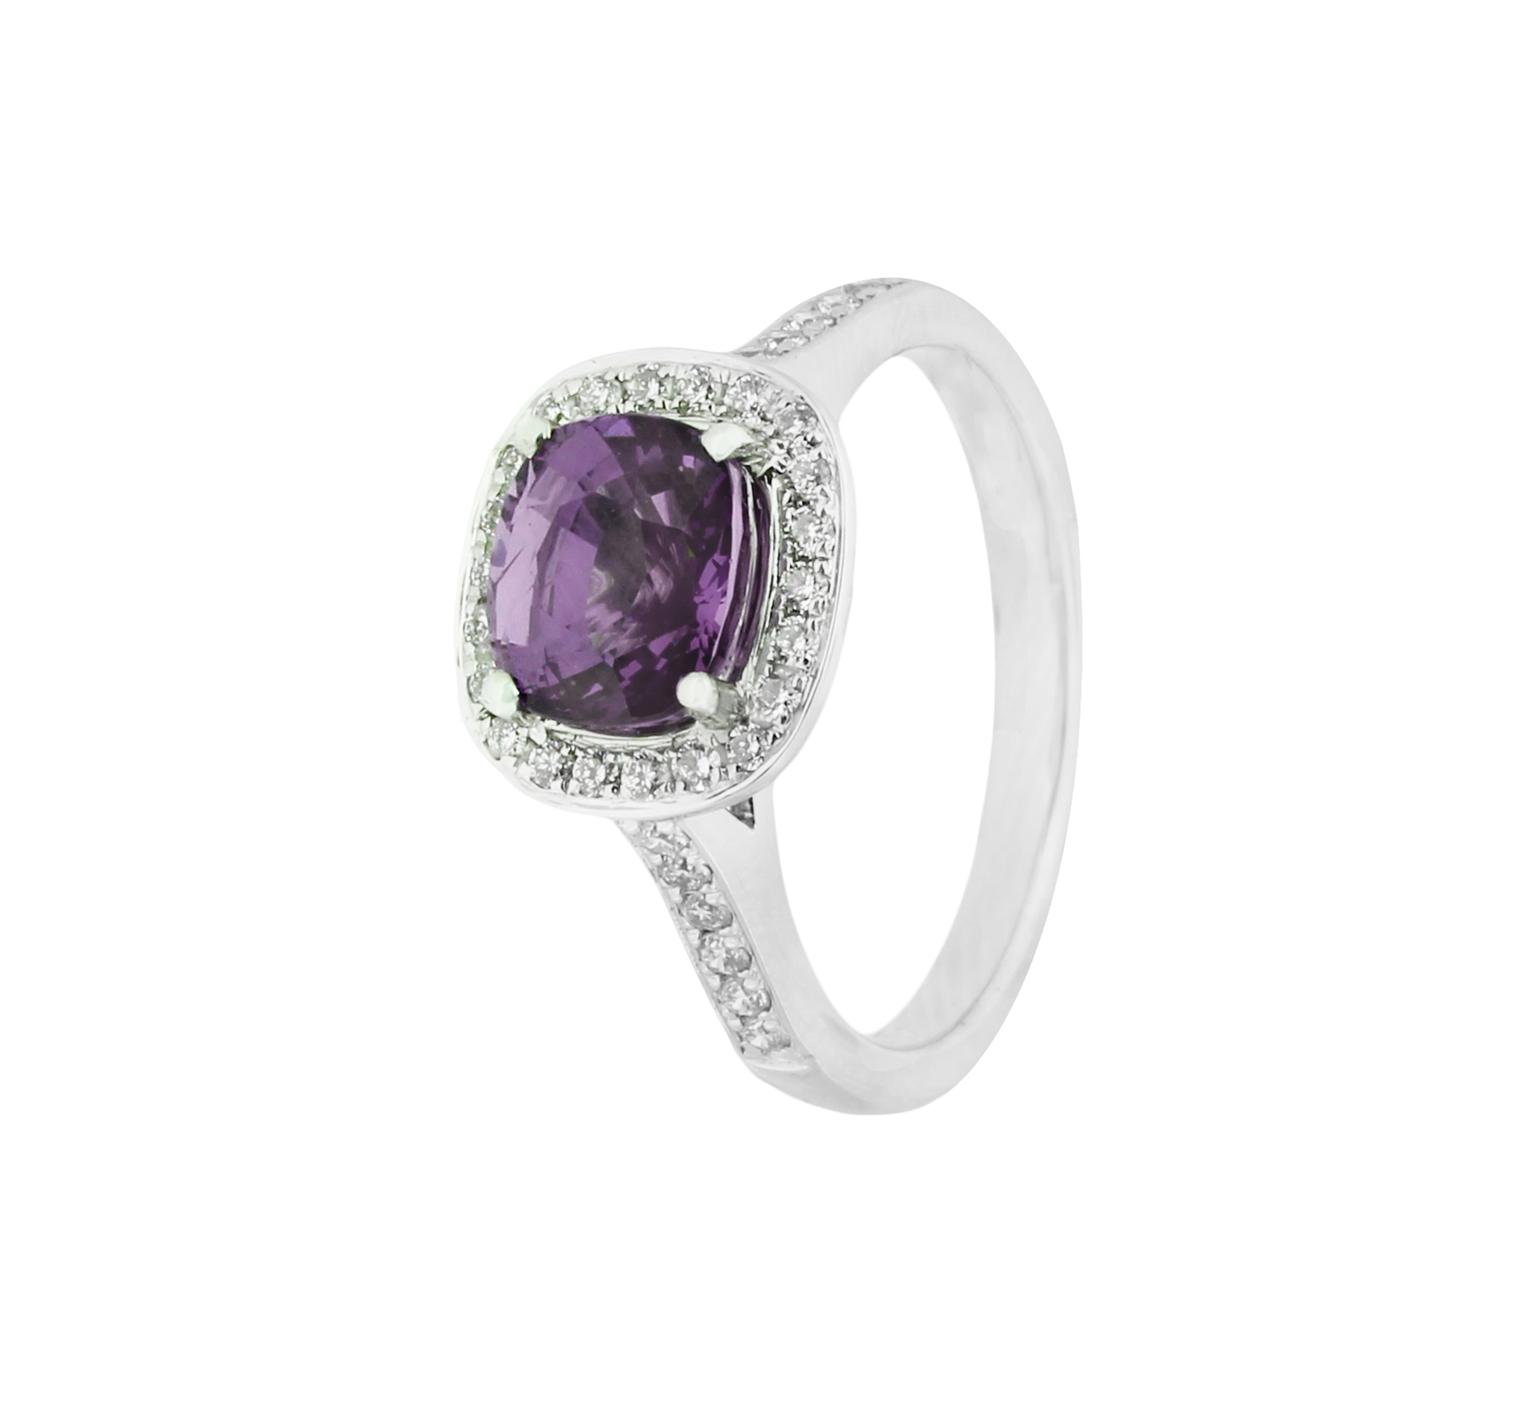 Holts mauve sapphire ring